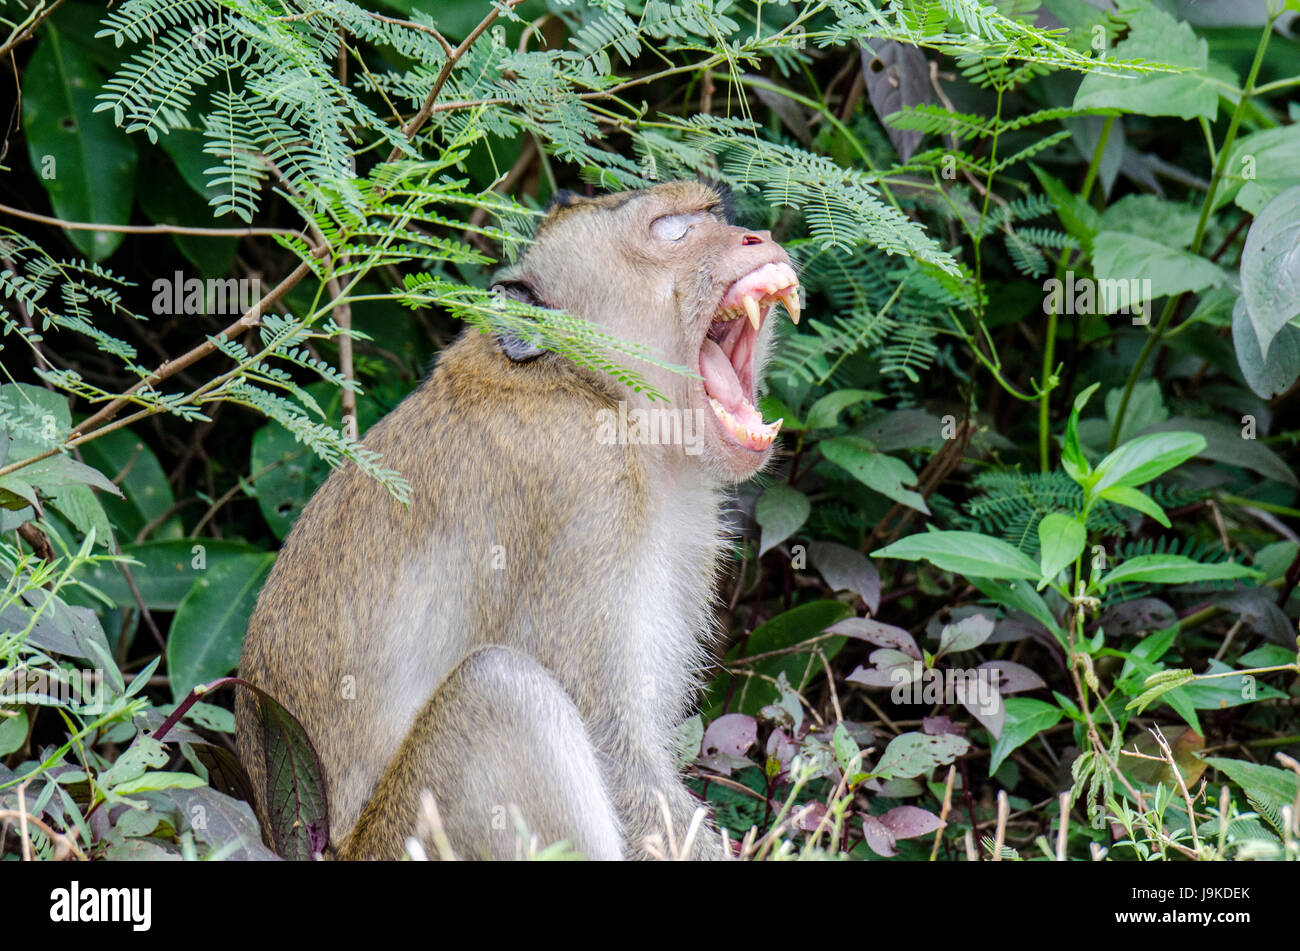 A portrait of lone adult crab-eating macaque (Macaca fascicularis) or long-tailed macaque yawning showing off sharp teeth in Thailand Stock Photo